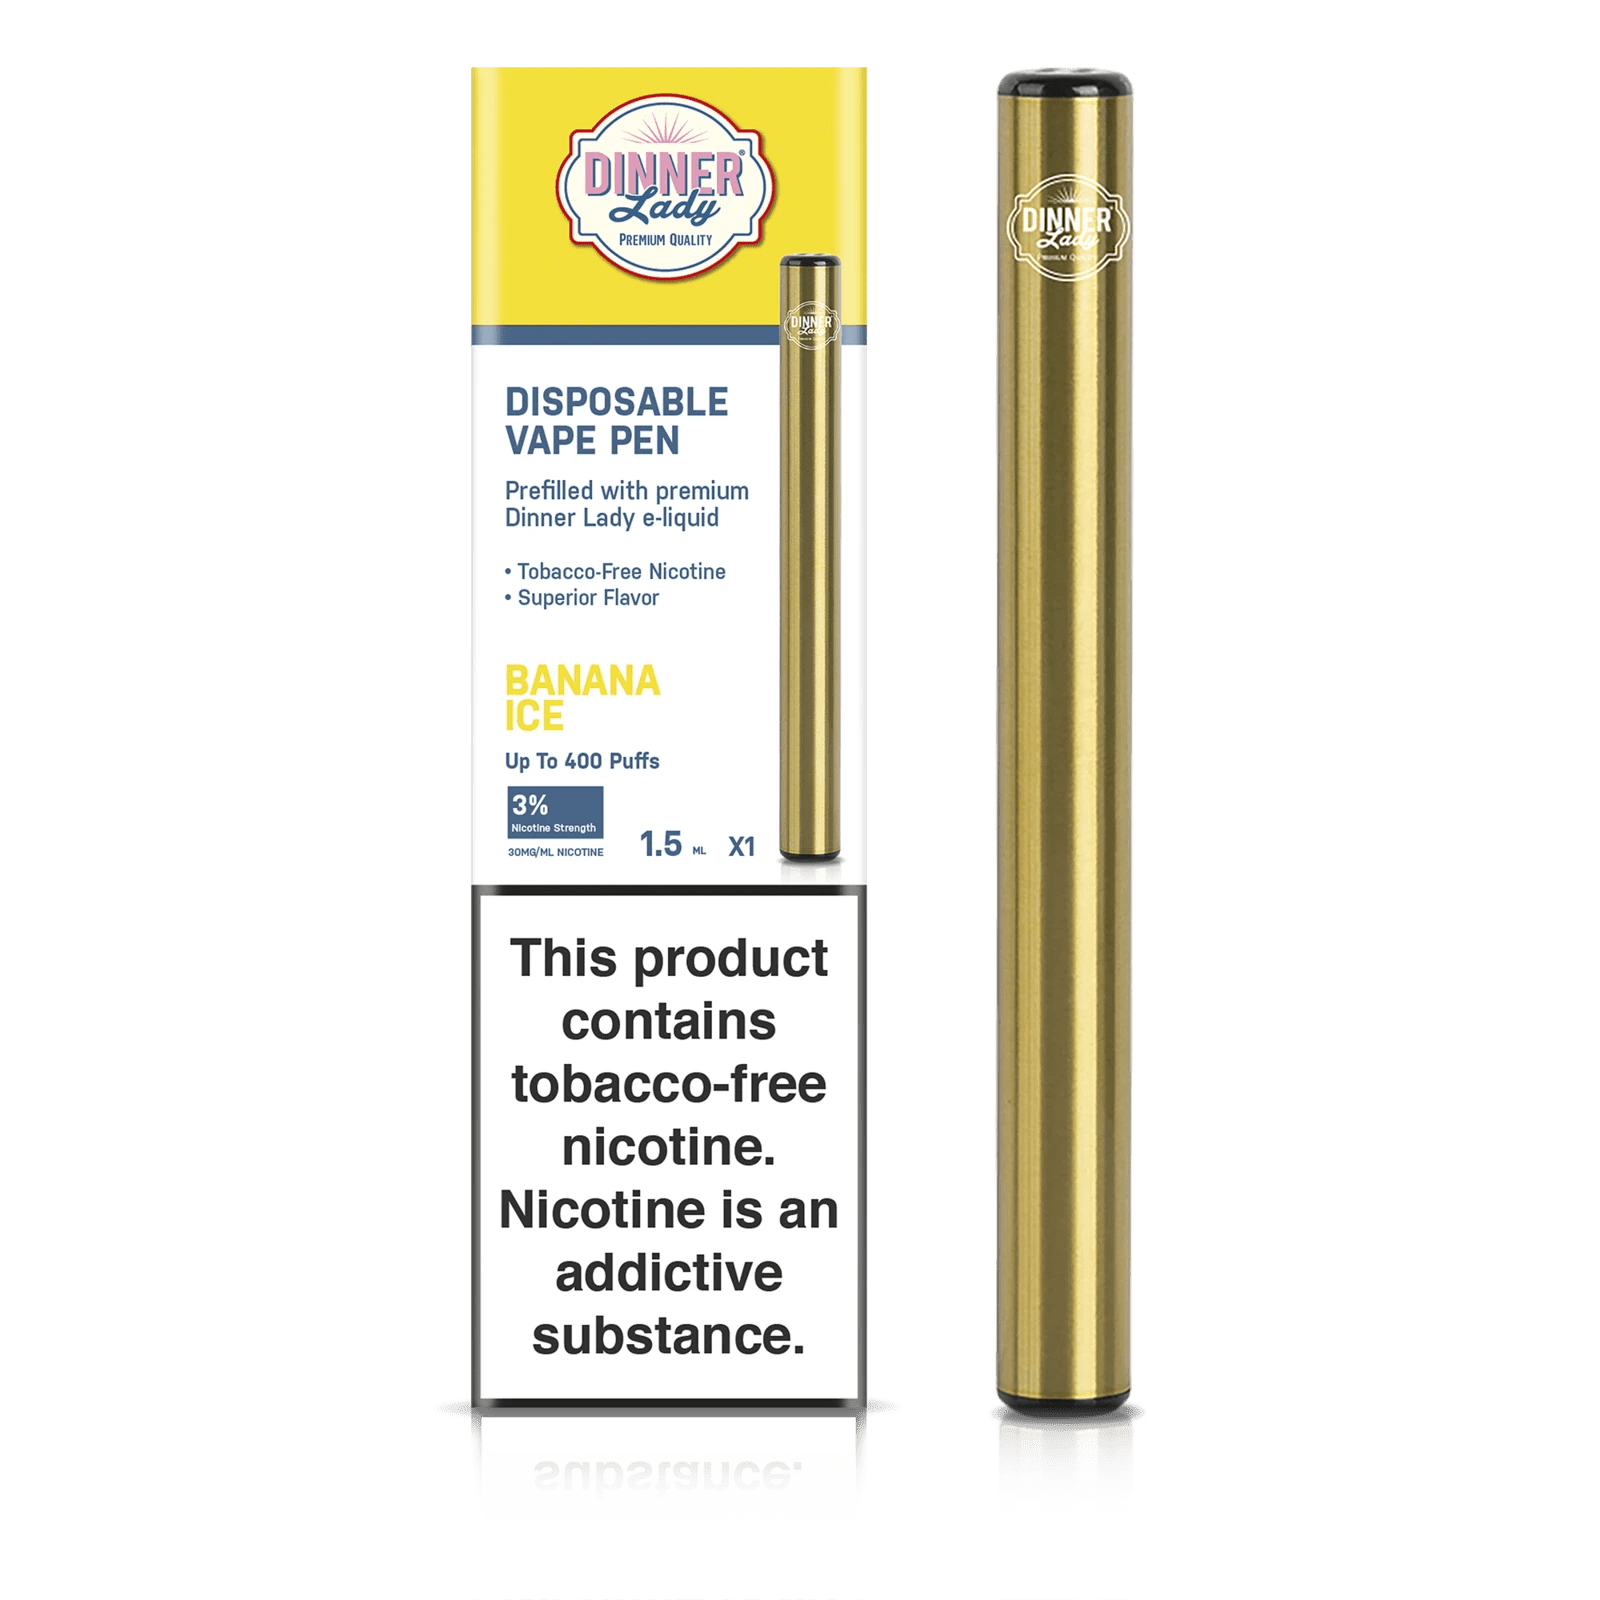 Dinner Lady Disposable Vape Dinner Lady Tobacco-Free Nicotine Disposable Vape